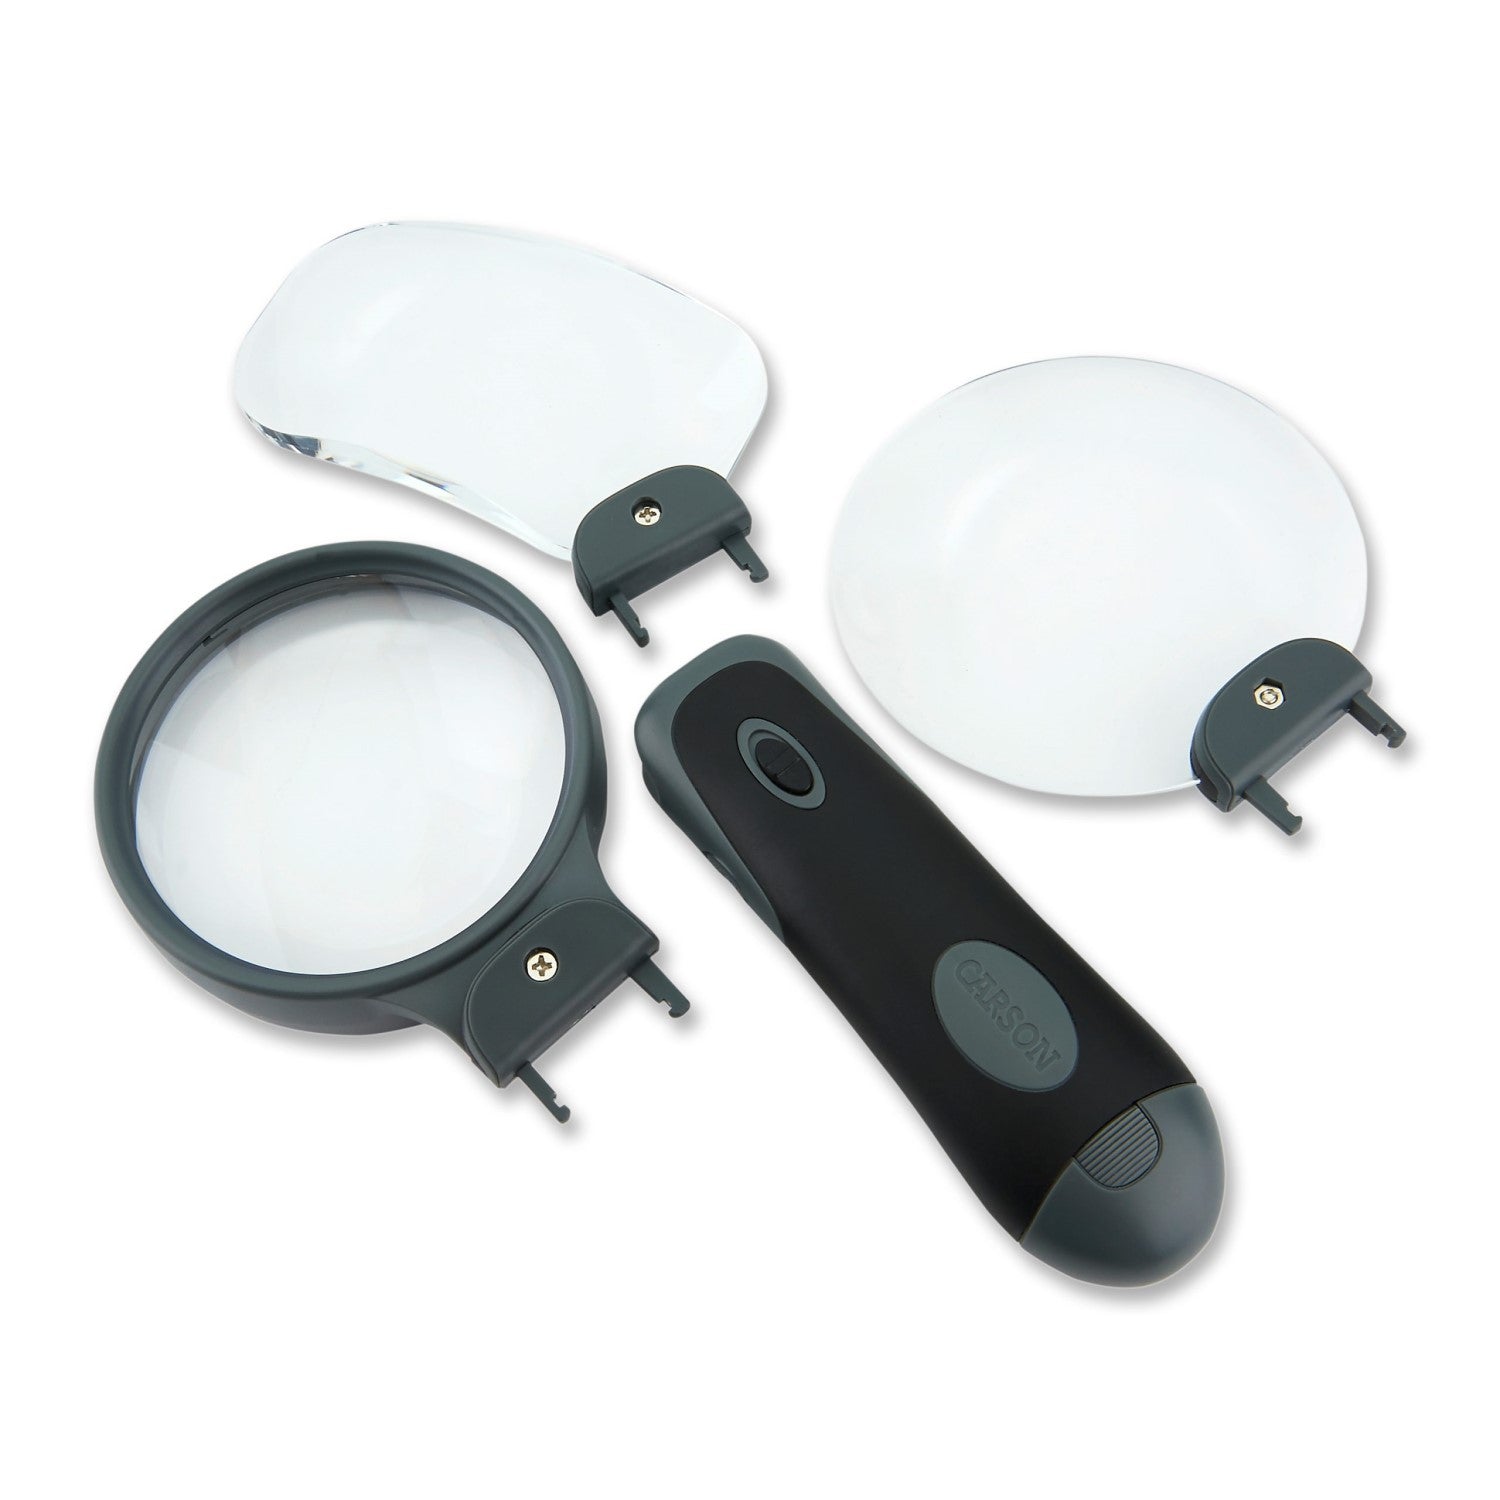 Image of the Remov-A-Lens™ with the 3 lenses that it comes with.